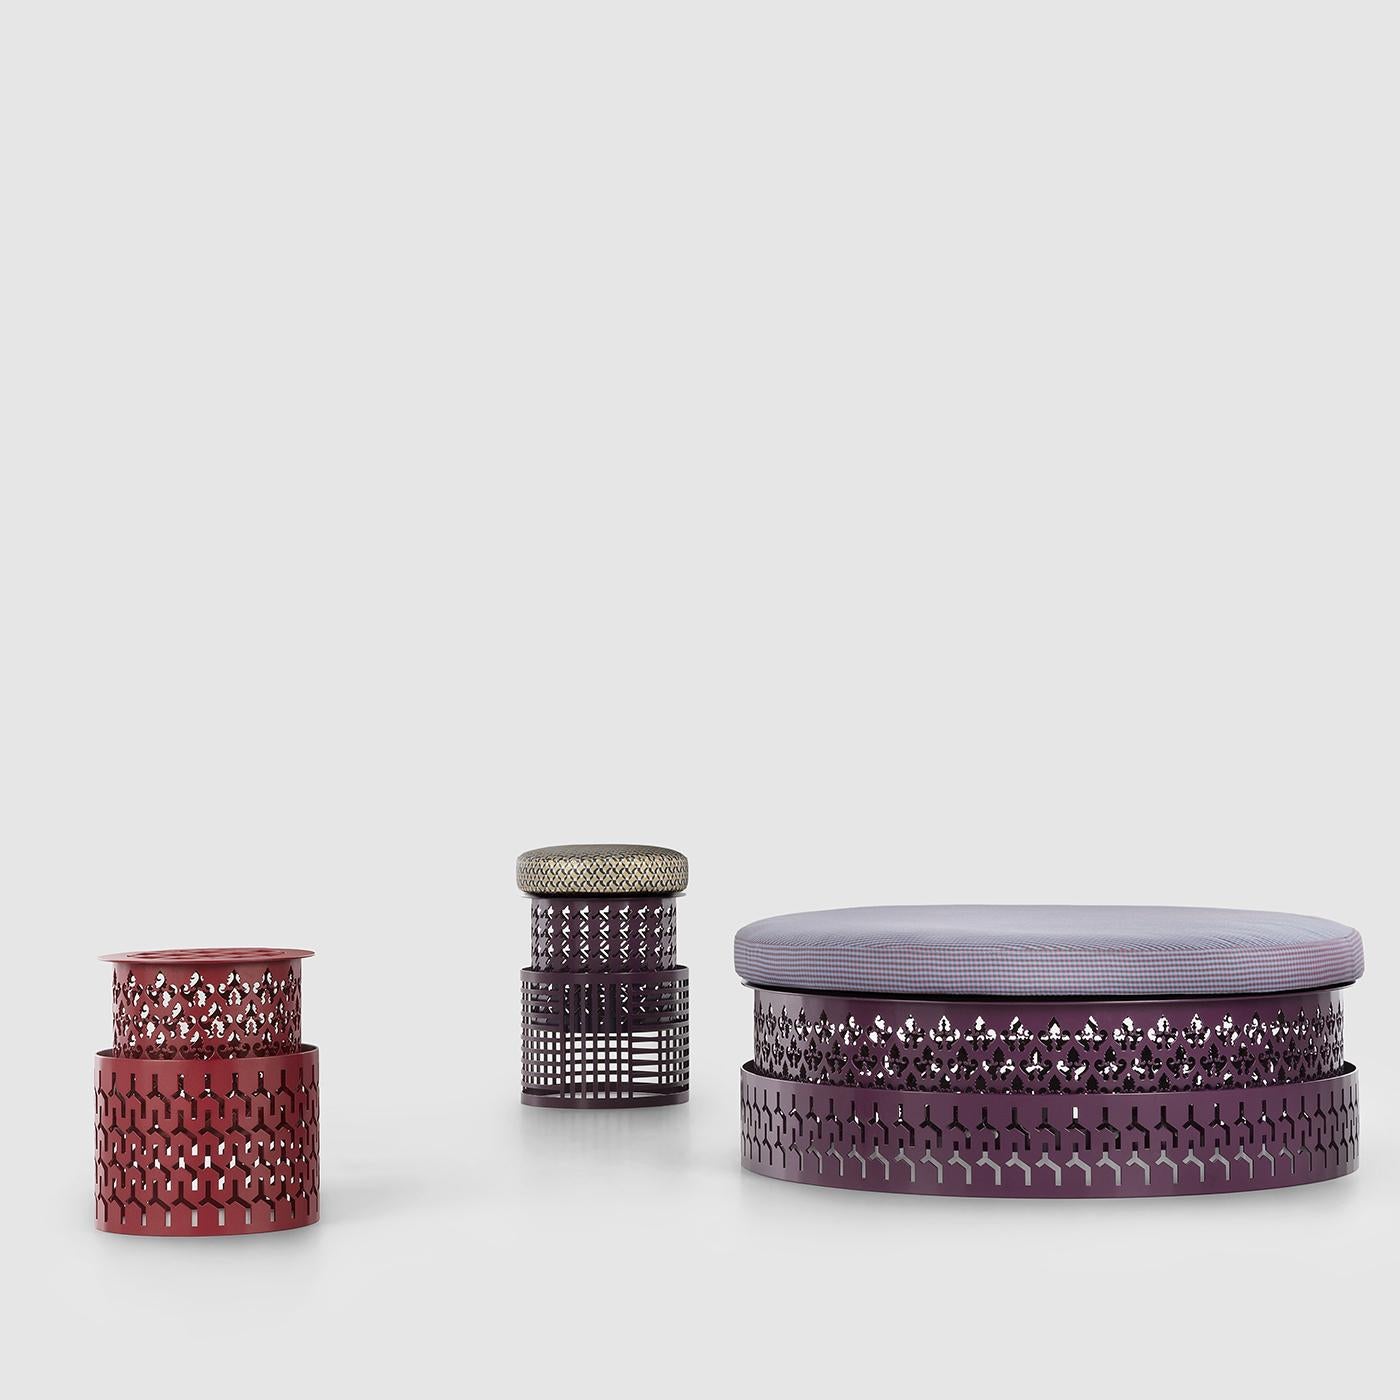 Contemporary and sophisticated, this pouf will be a charming addition to both an indoor or outdoor area. Boasting a dark purple hue, it is entirely crafted of steel. The structure is marked by two cylindrical pieces distinguished by a captivating